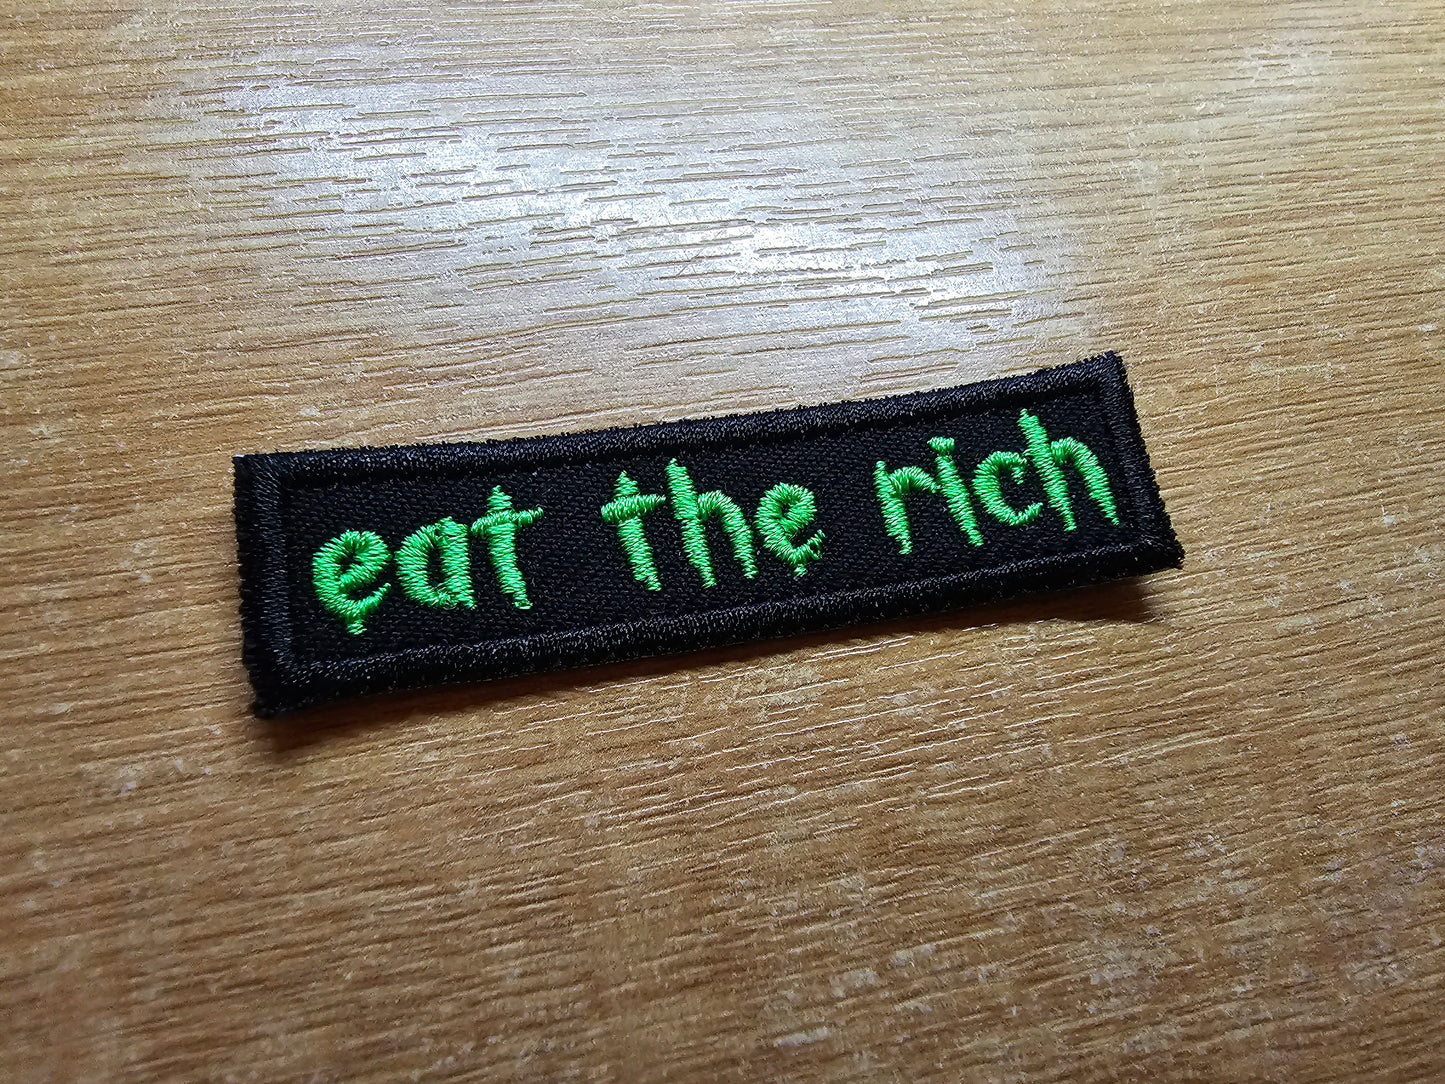 Eat The Rich MINI Embroidered Iron On Patch Politics Punk and Goth - Very small! Green and Black